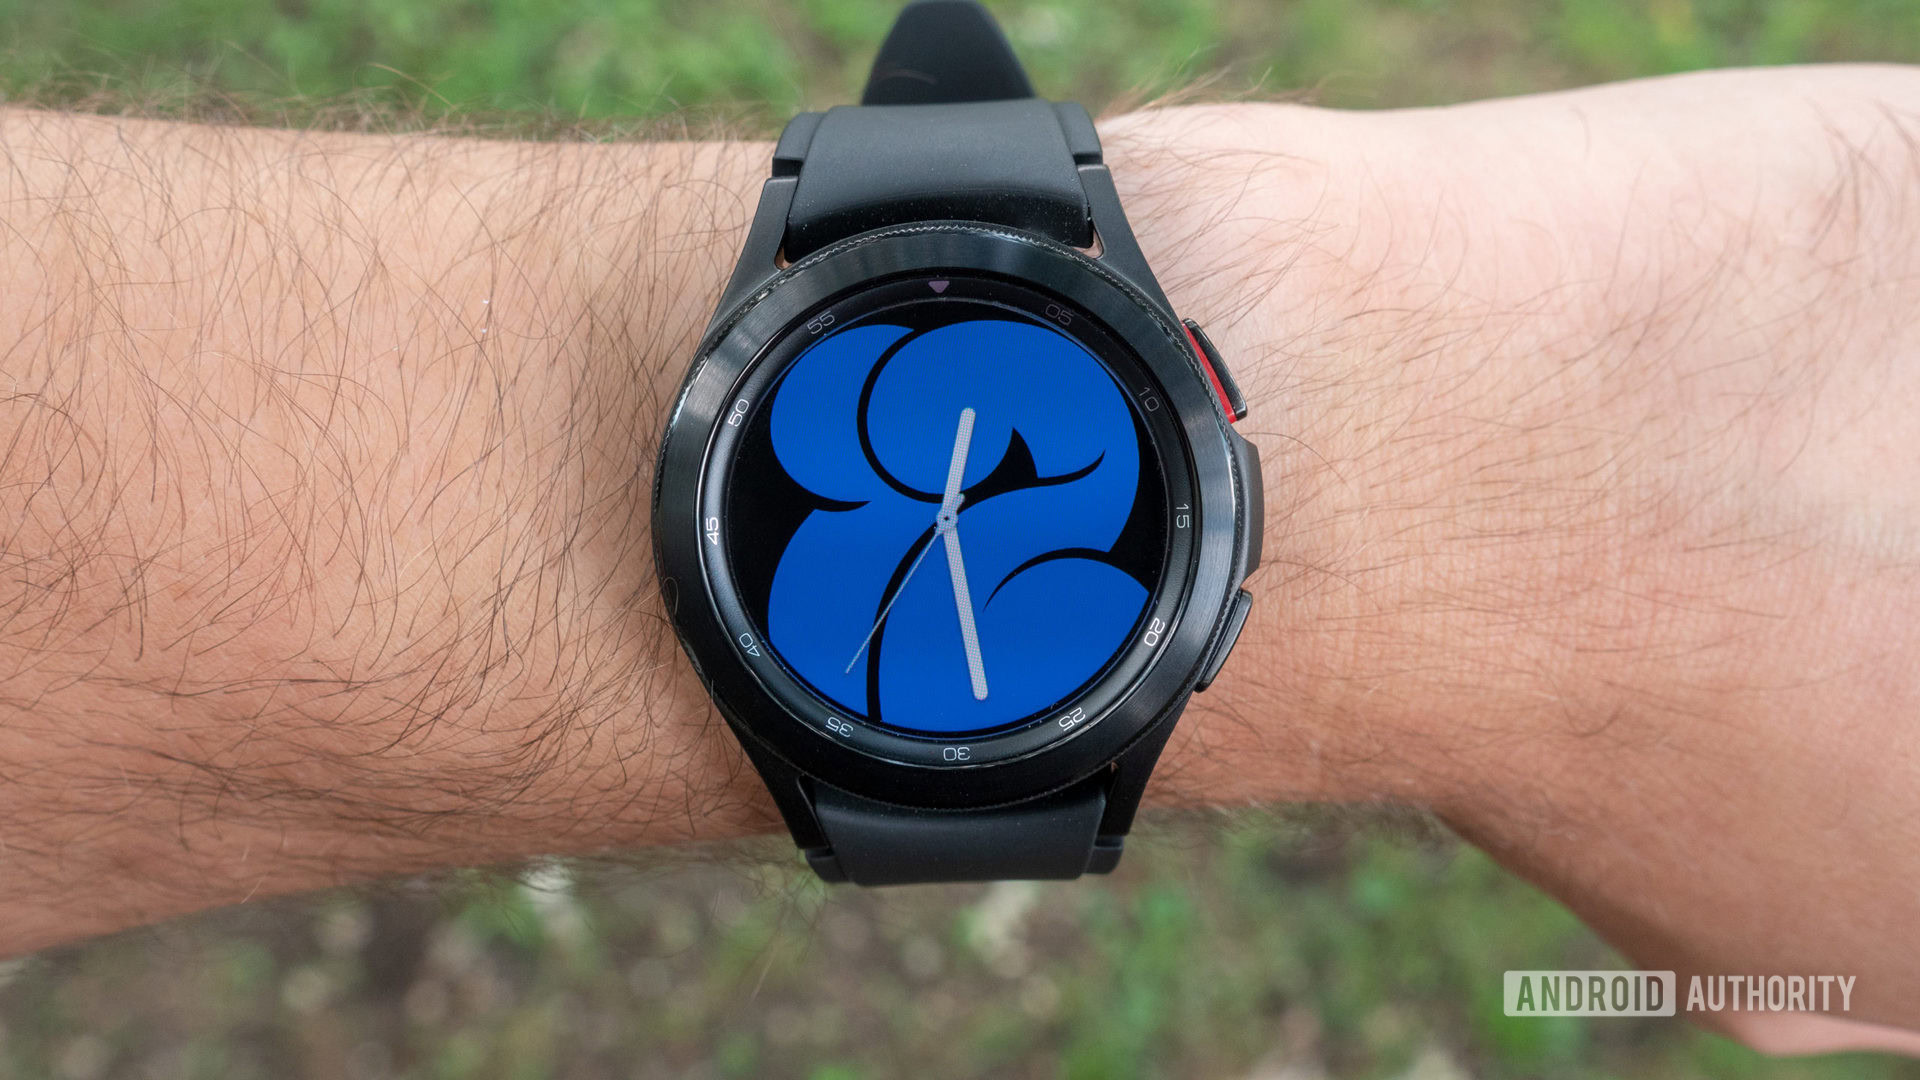 Samsung Galaxy Watch 4 Review | Trusted Reviews